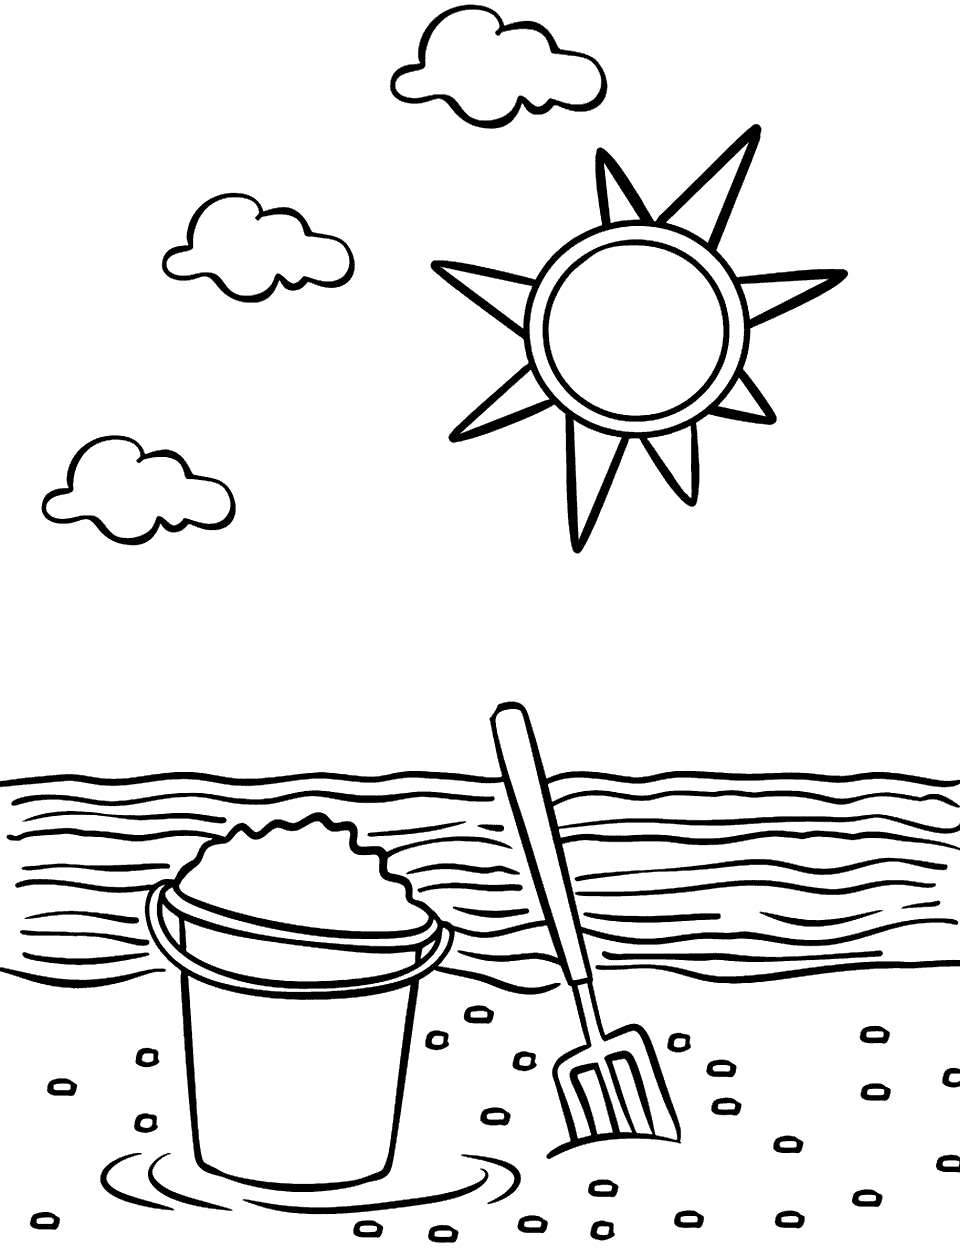 Sunny Beach Day Toddler Coloring Page - A simple scene of a beach with a sun in the sky, a bucket, and a spade.